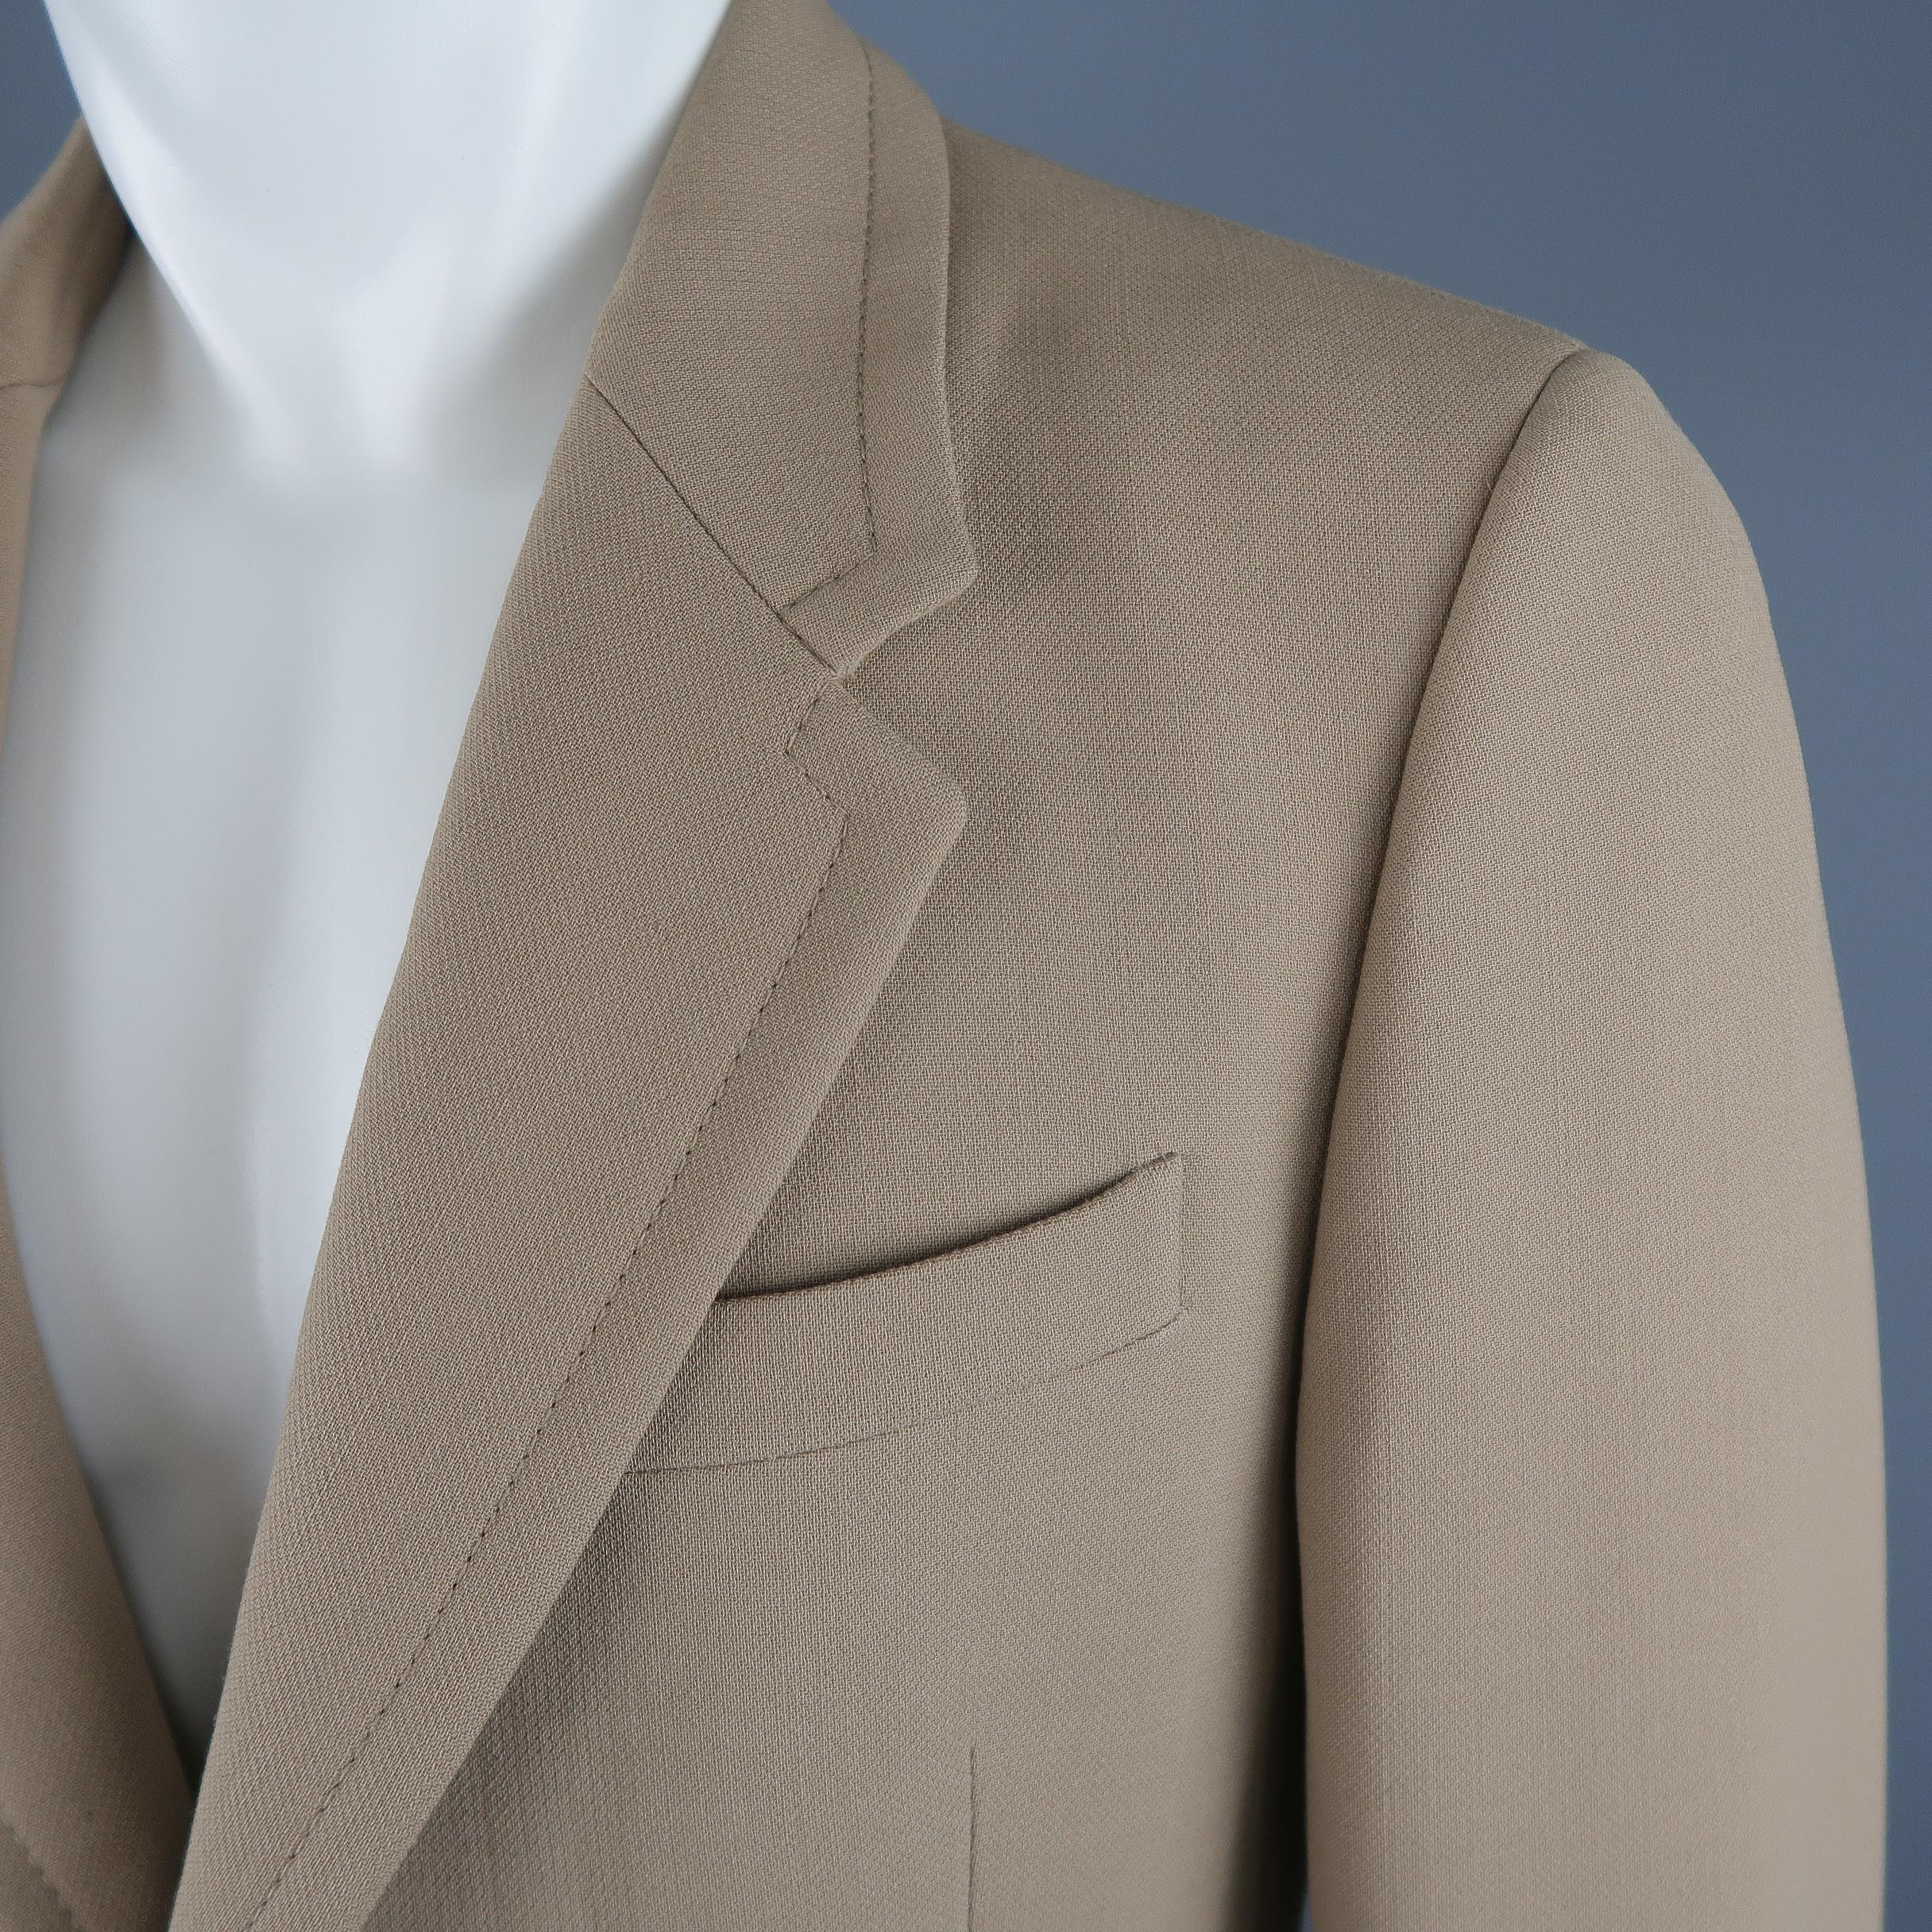 PRADA sport coat comes in structured tan khaki wool with a notch lapel, single breasted, two button closure, triple flap pockets, and single vented back. Made in Italy.
 
Excellent Pre-Owned Condition.
Marked: IT 52 R
 
Measurements:
 
Shoulder: 17